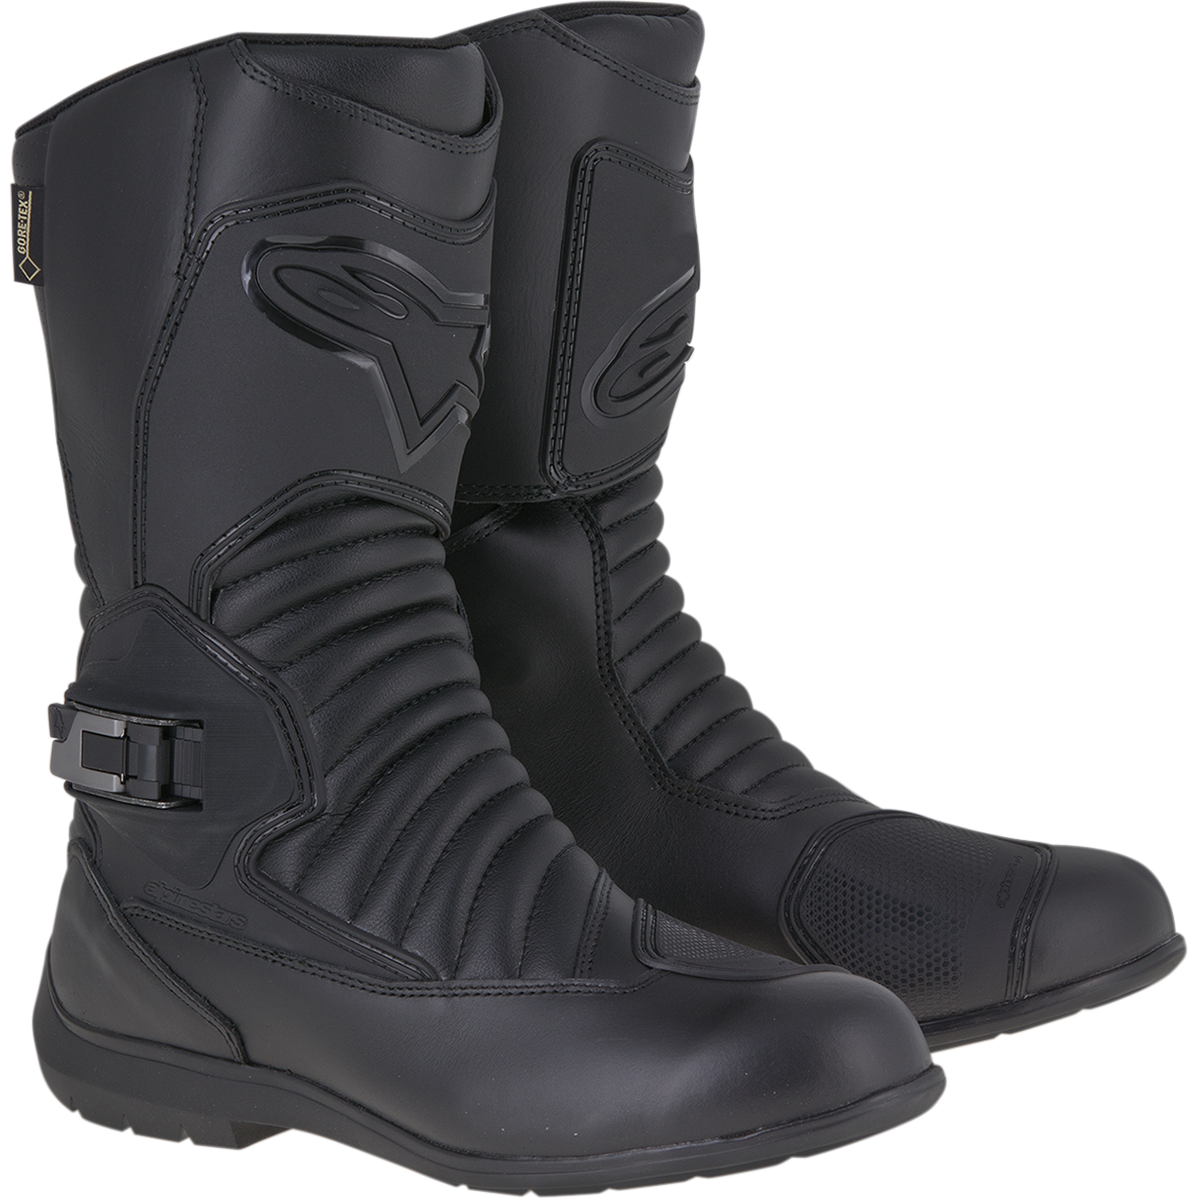 Supertouring Gore-Tex Boots